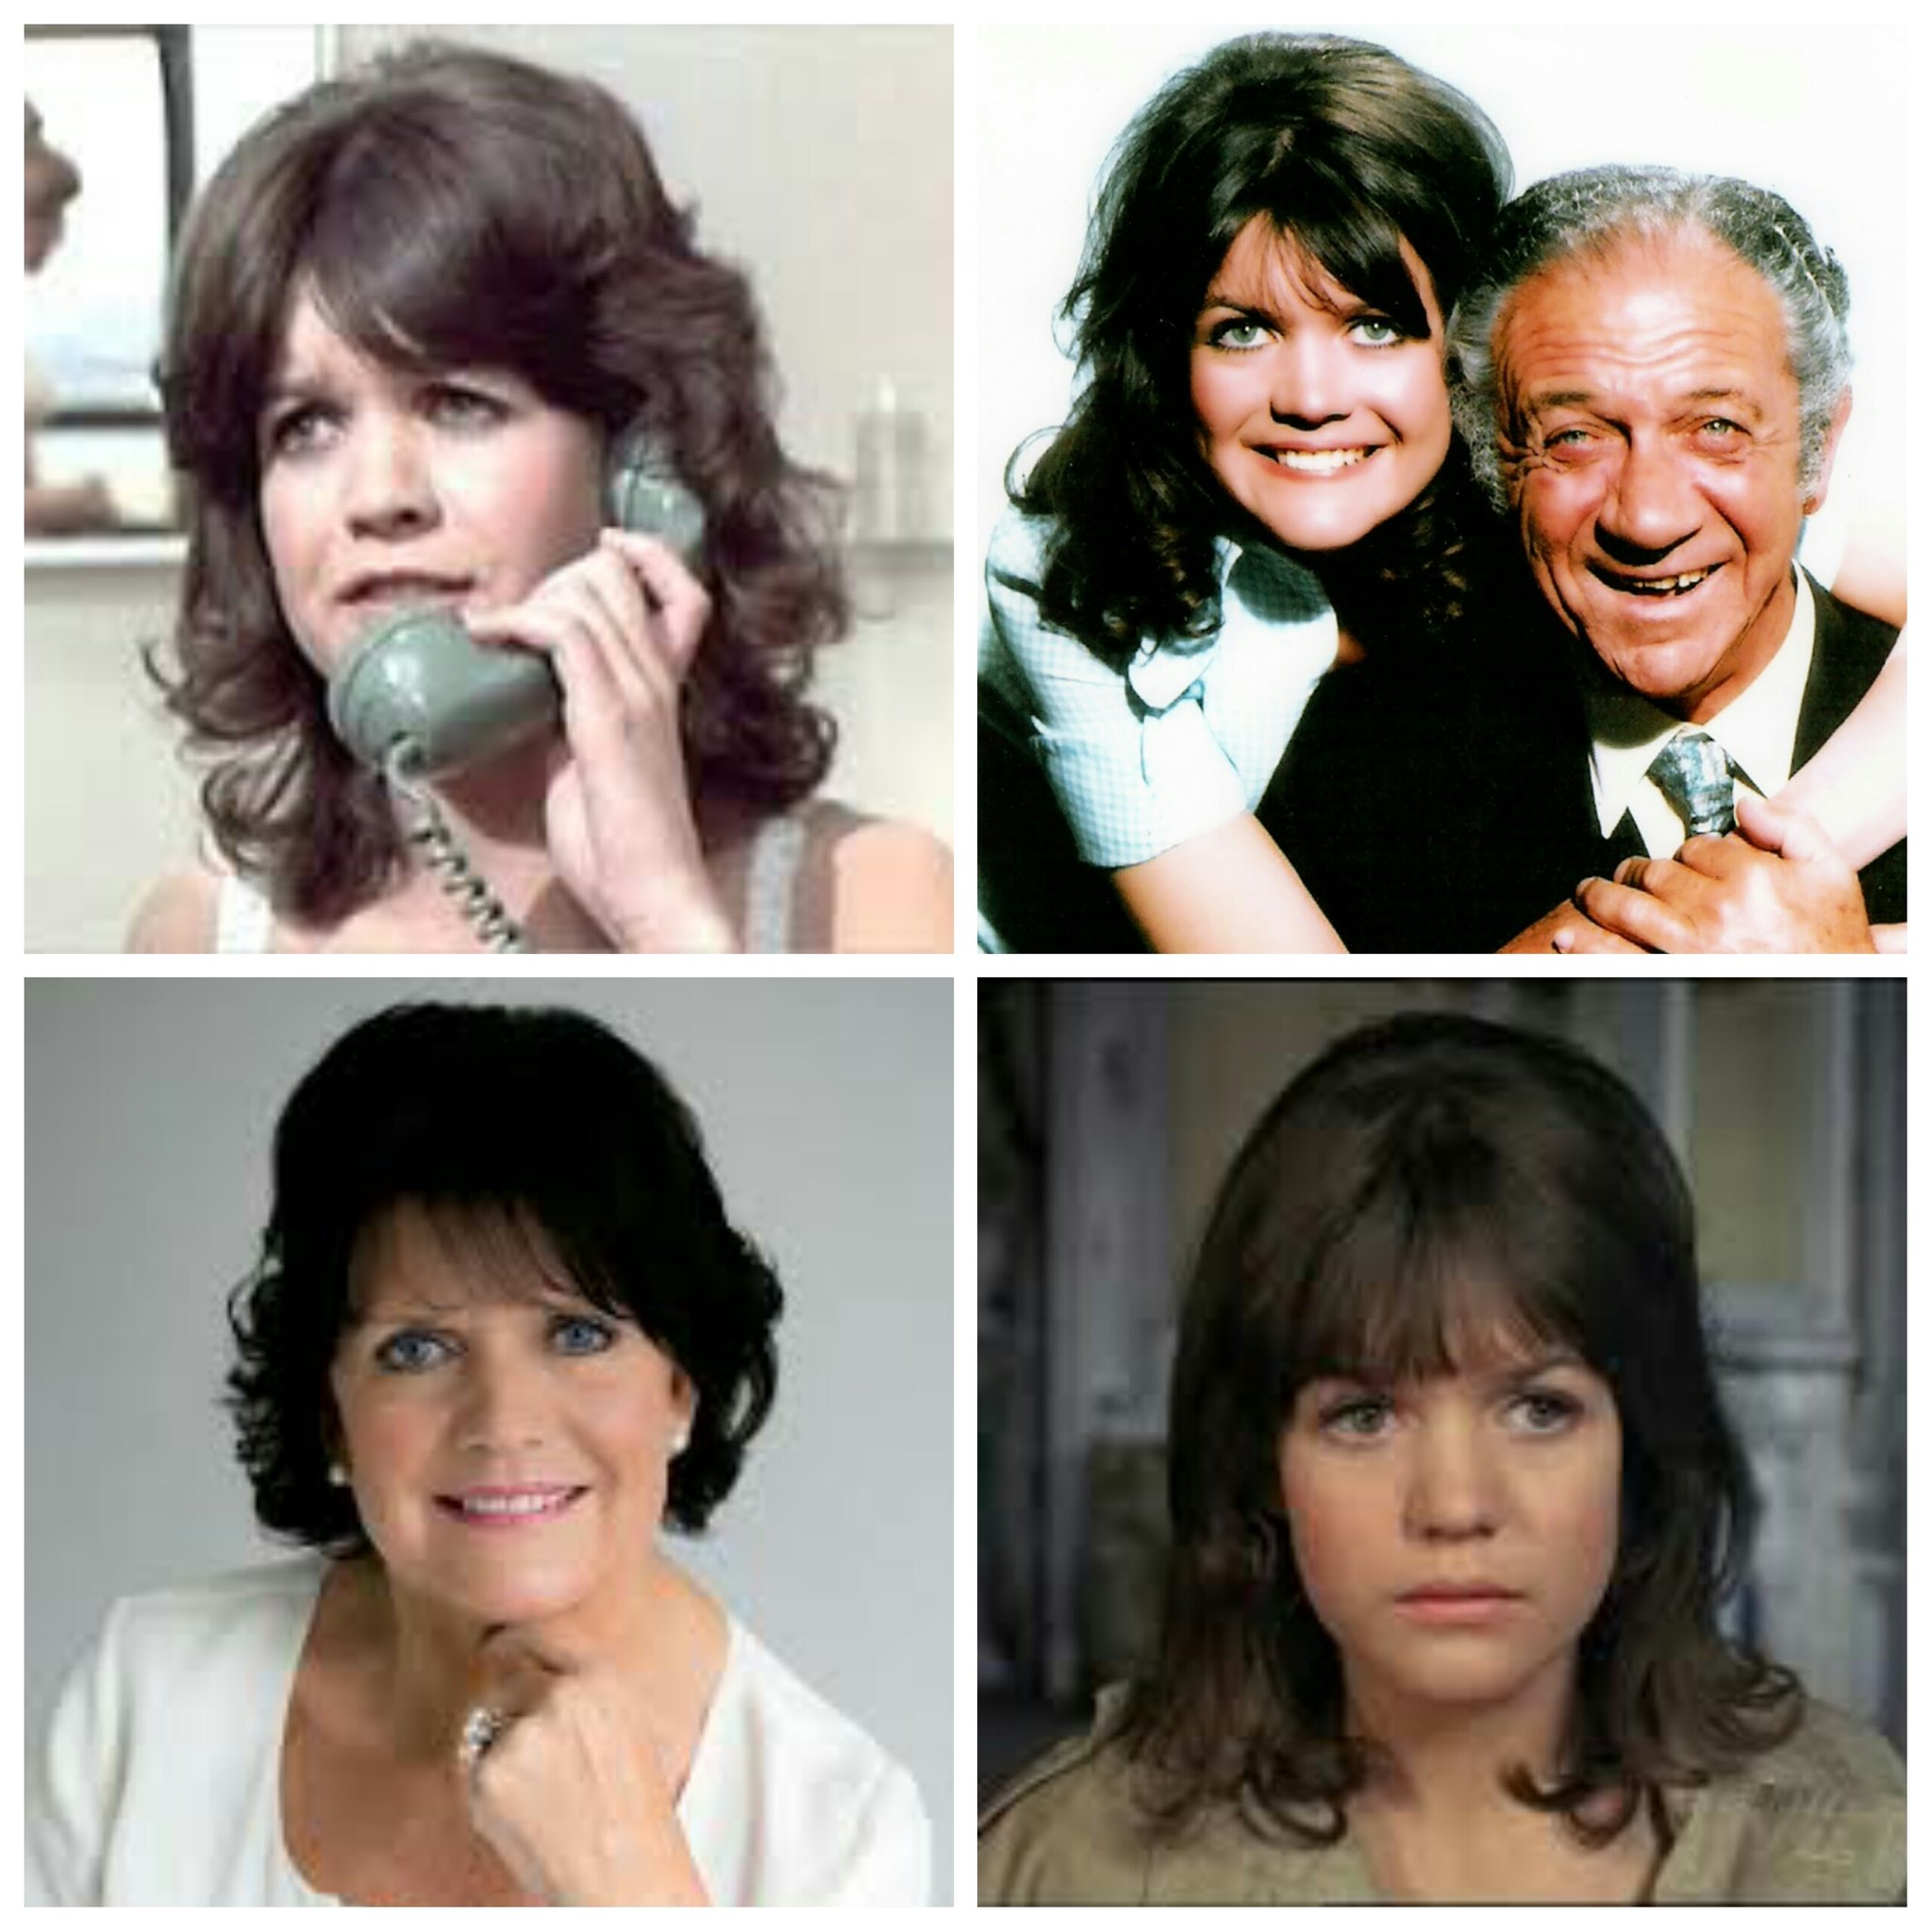 Sally Geeson is 67 today, Happy Birthday Sally! 